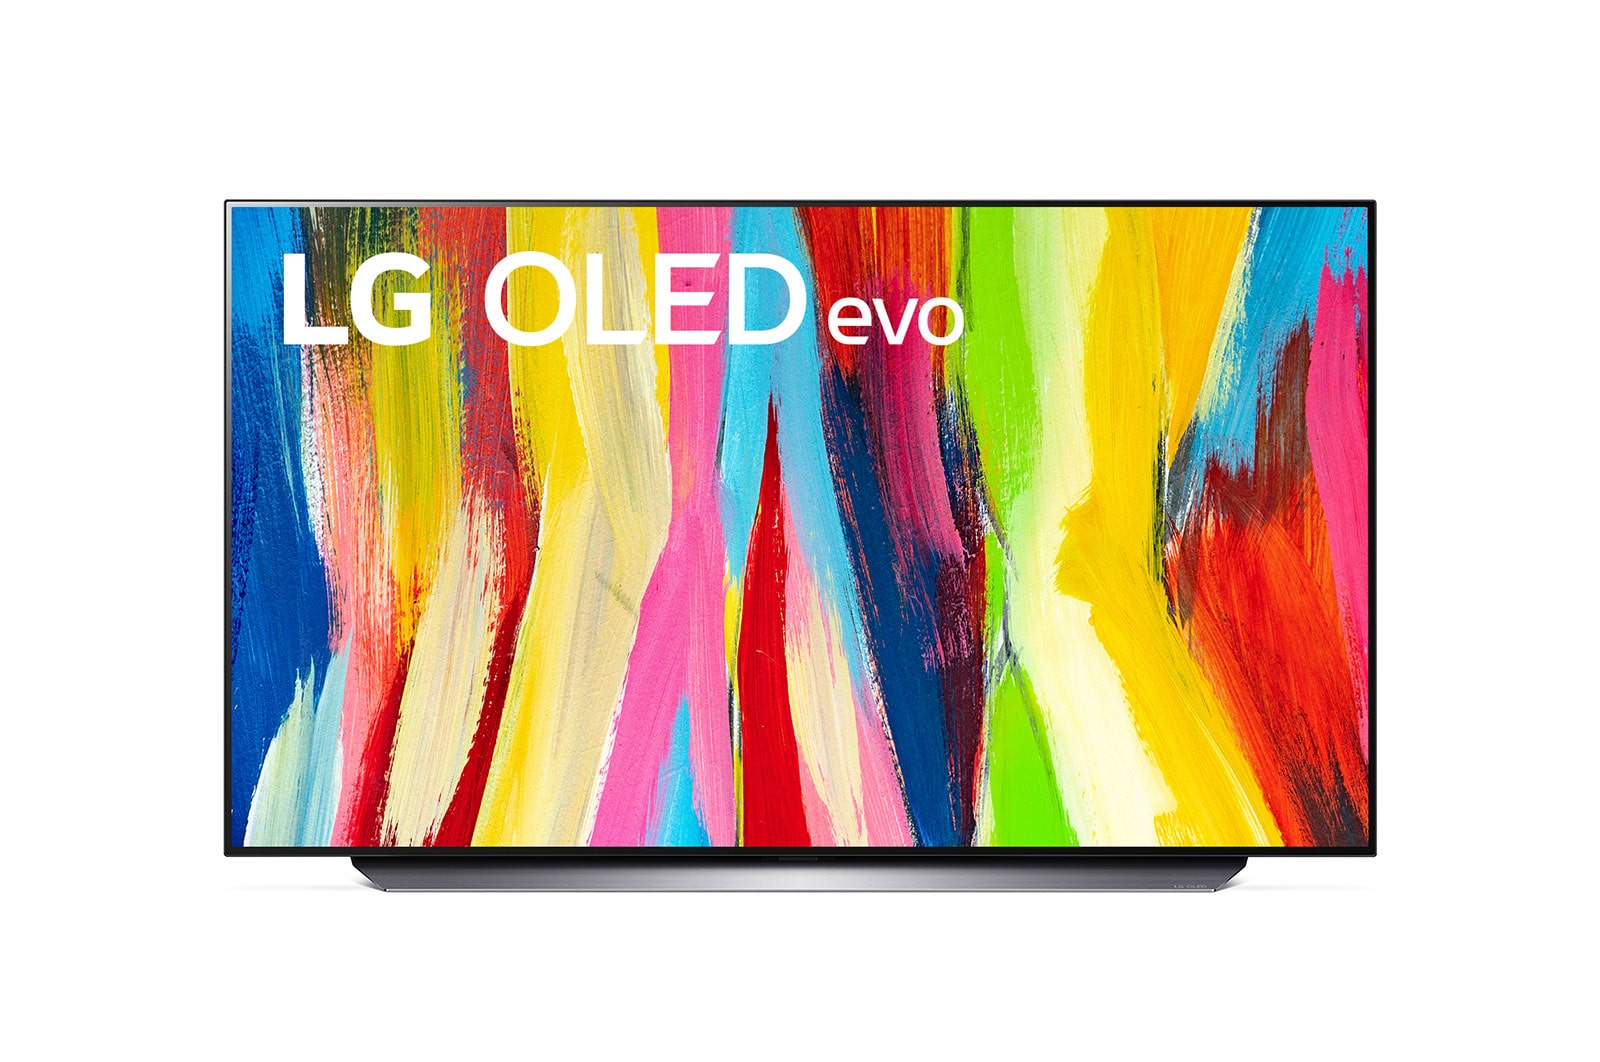 Should I buy the 42-inch LG C2? We test the smallest OLED 4K TV